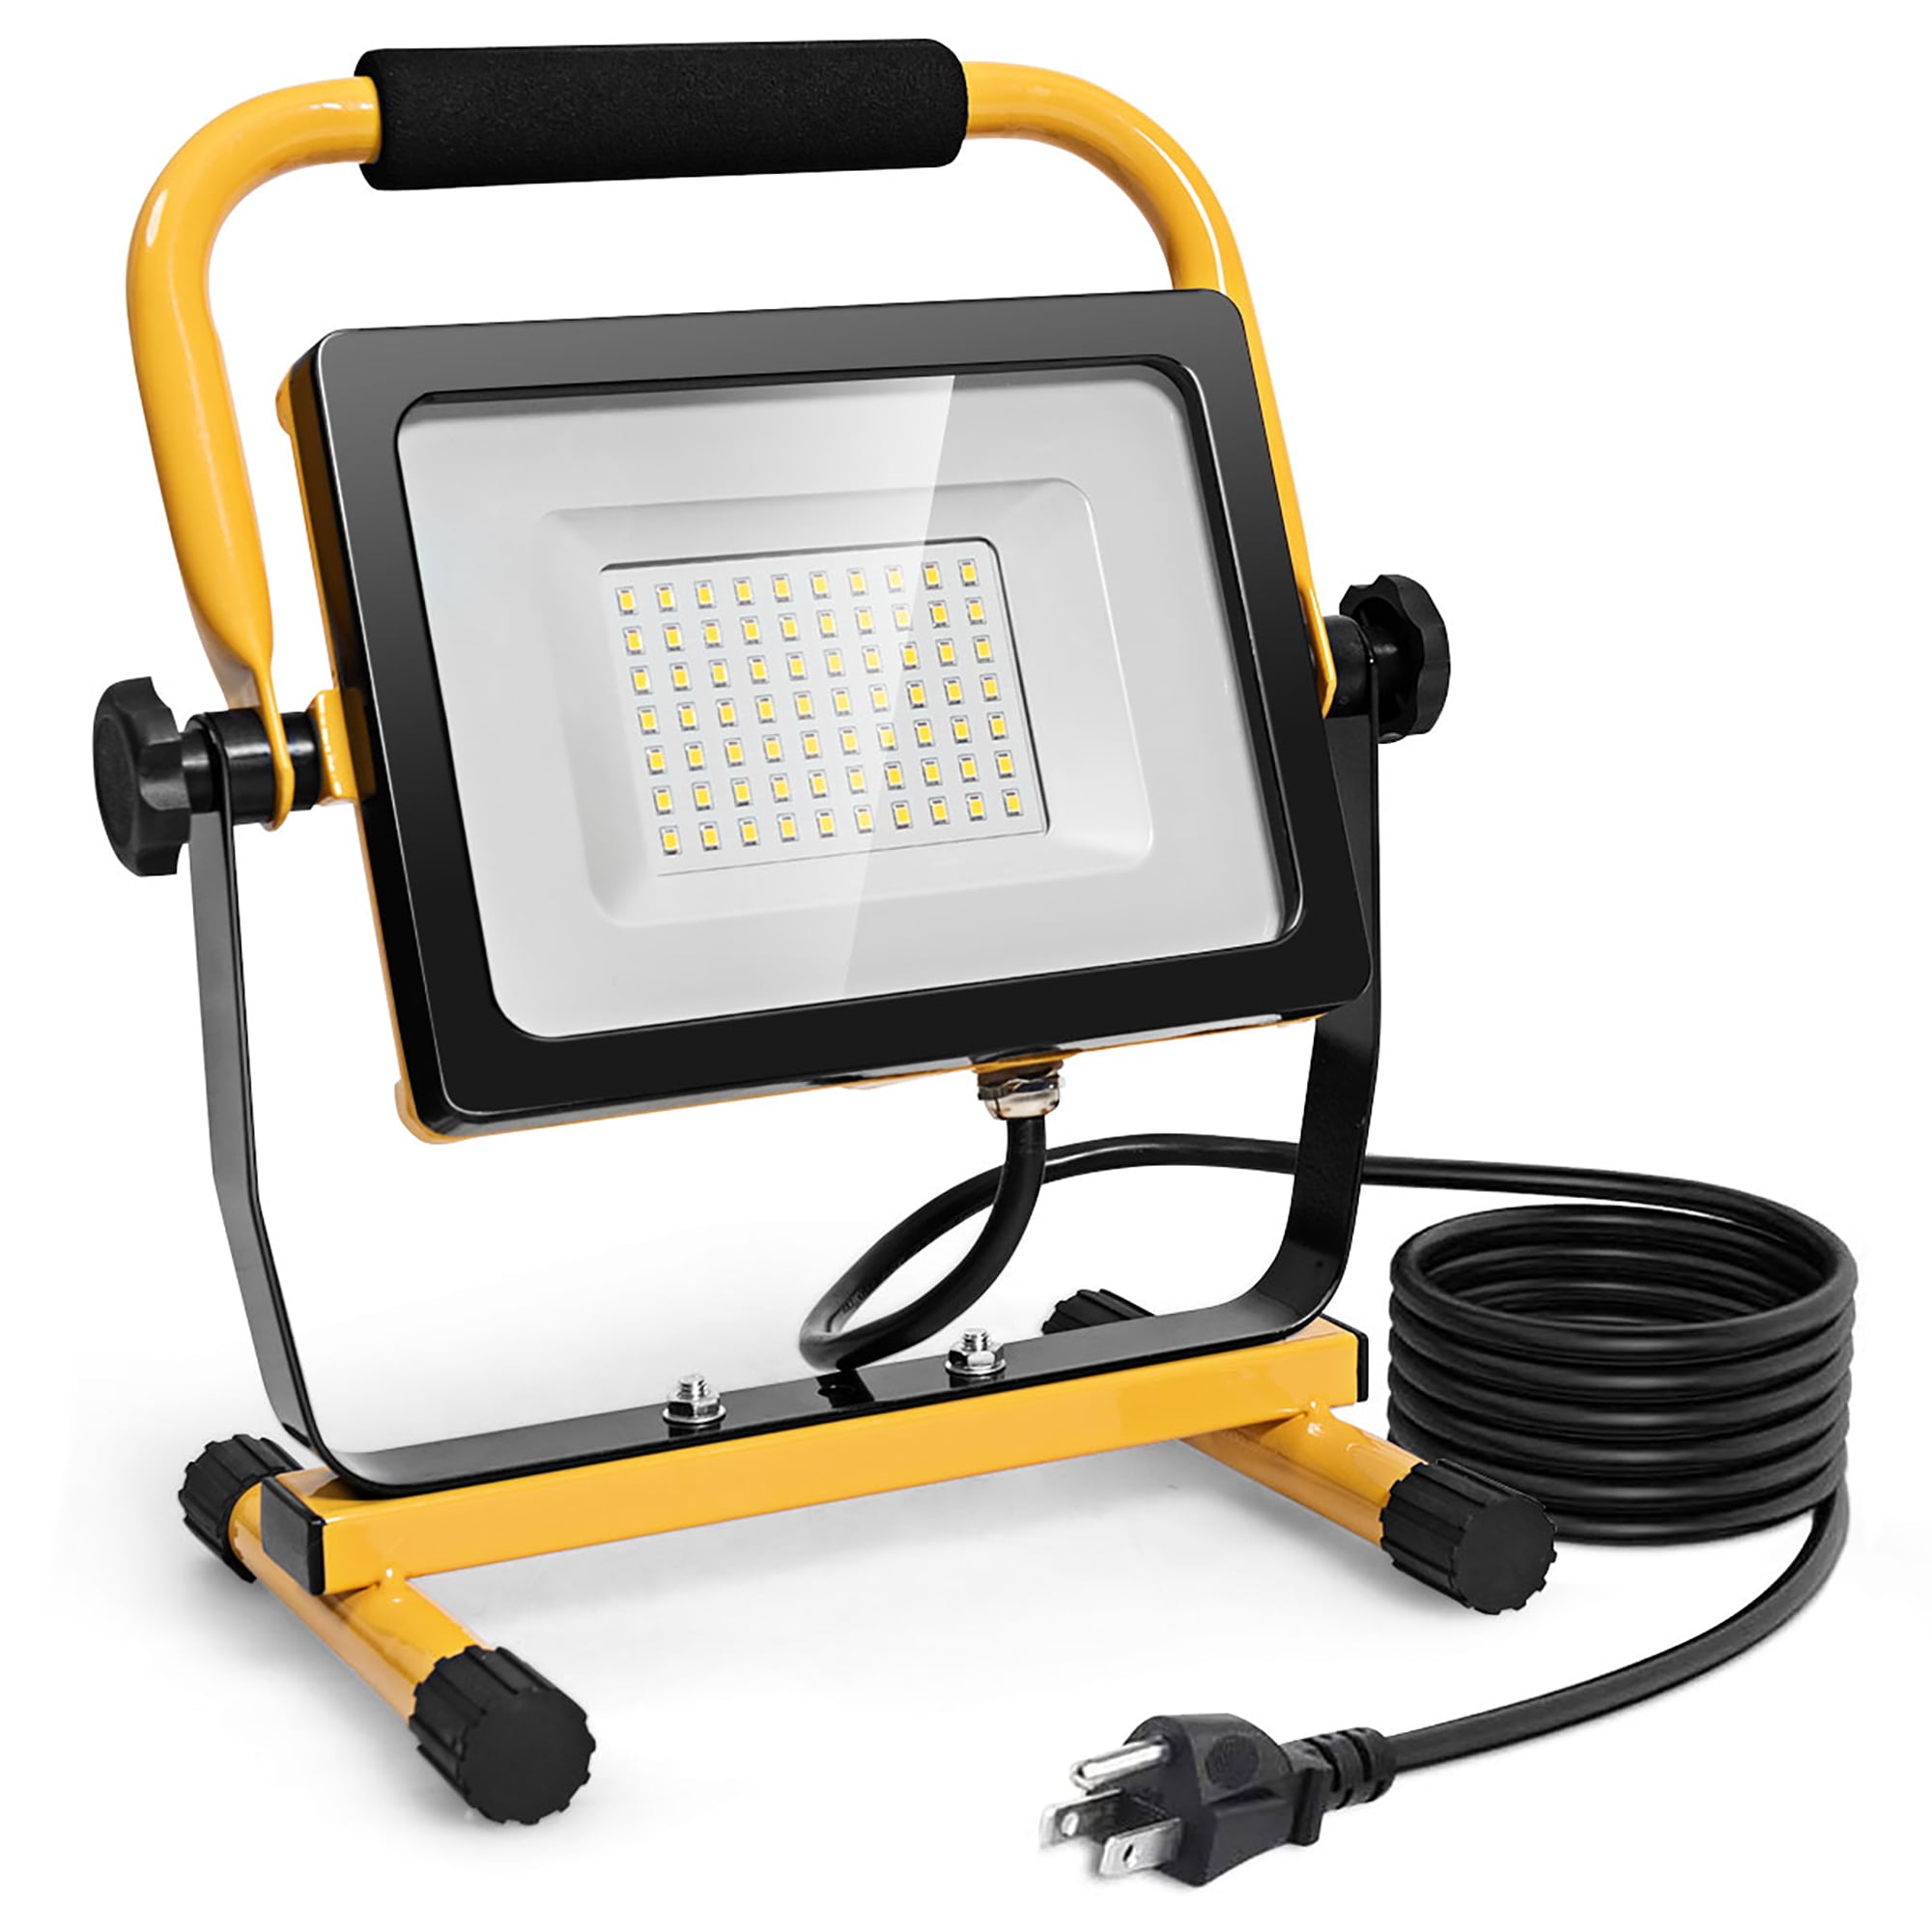 Mobile Power Rechargeable LED Work Flood Light Outdoor Indoor For Garage Camping 